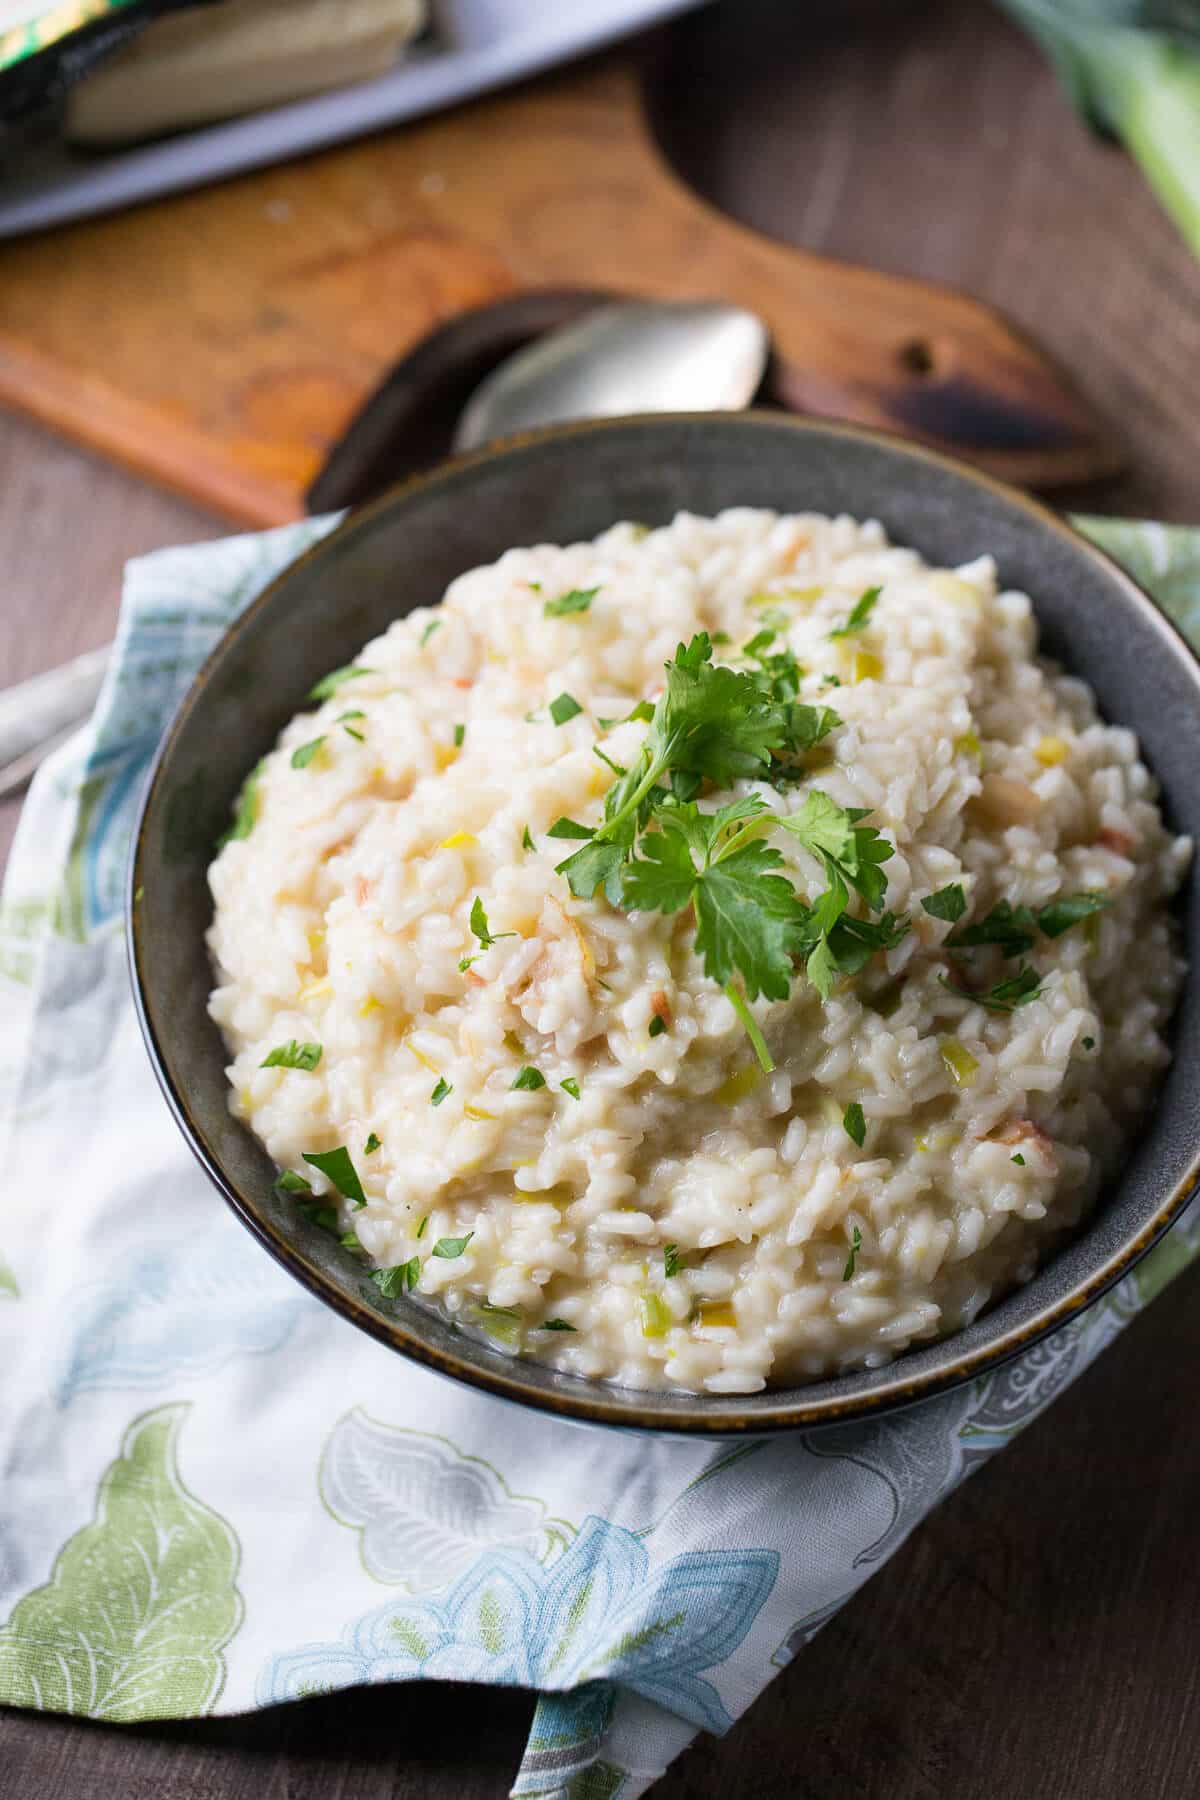 This bacon risotto is creamy and so cheesy! It has bacon and veggies which makes it oh so good!